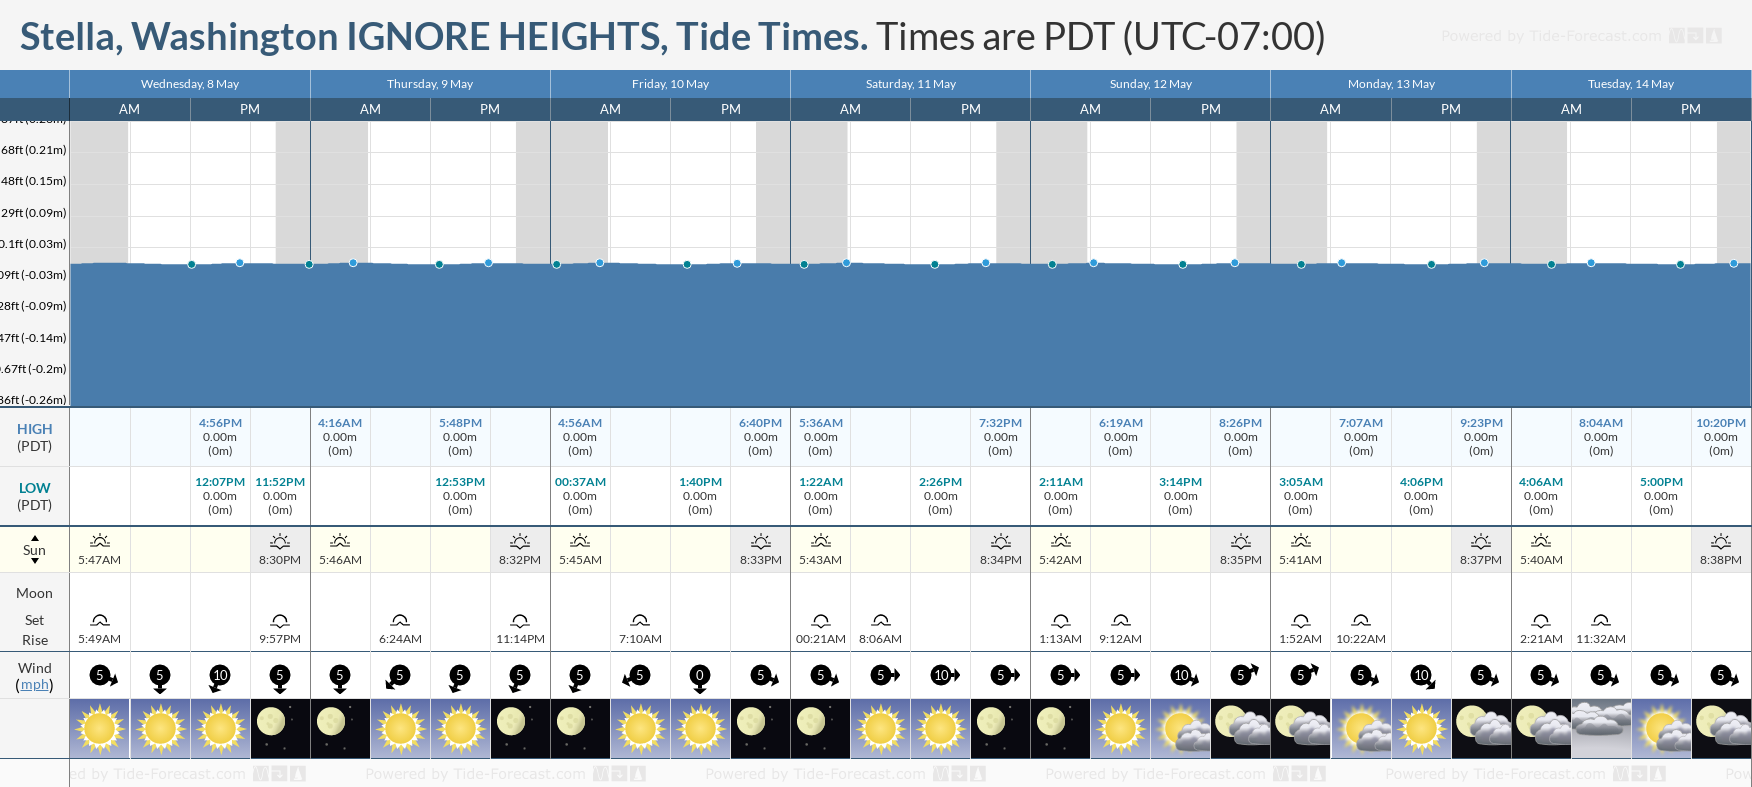 Stella, Washington IGNORE HEIGHTS Tide Chart including high and low tide times for the next 7 days